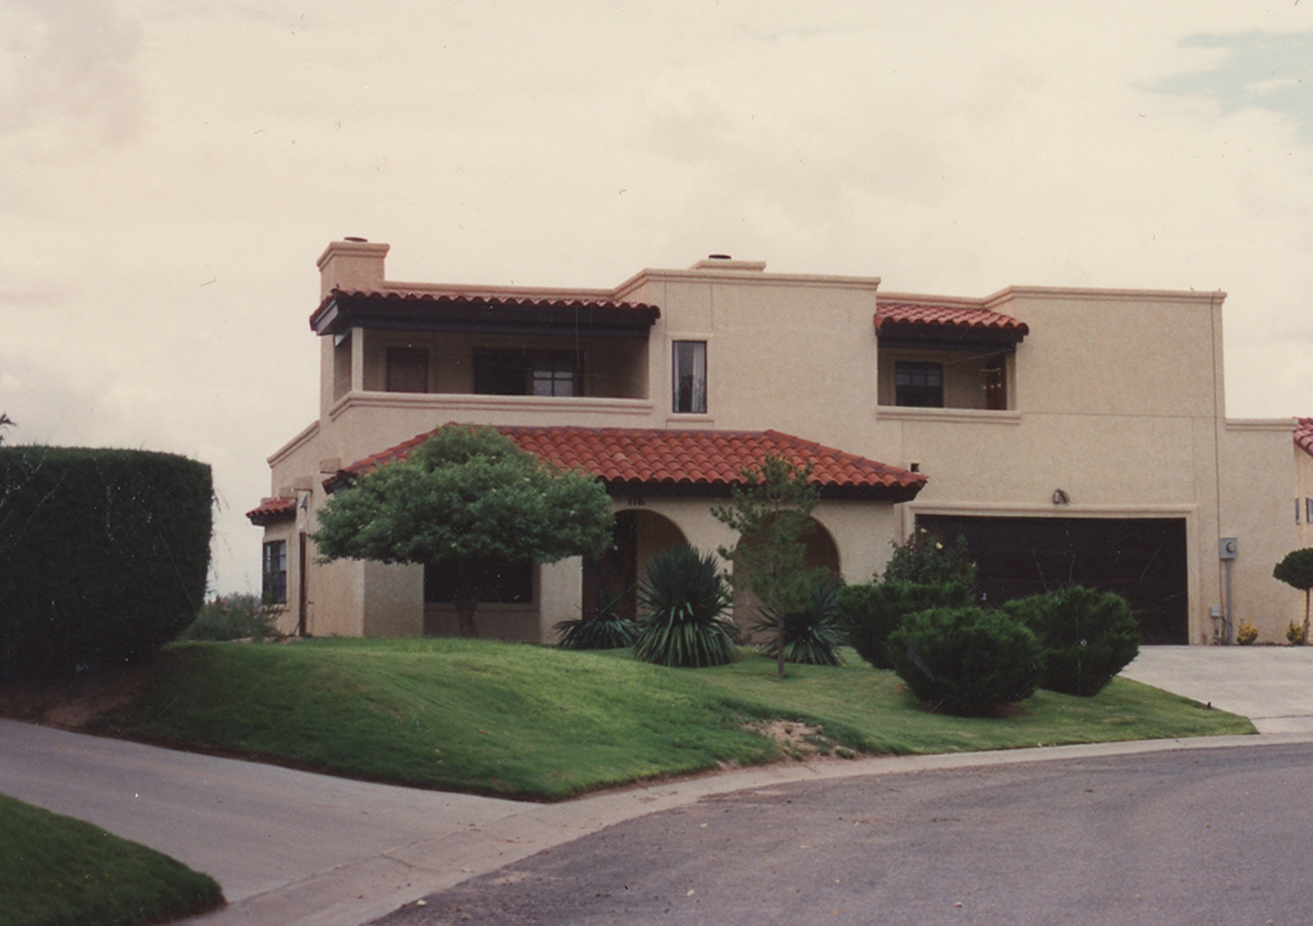 Ann's house she designed and supervised the building of in Santa Teresa, New Mexico in 1986
Photo ©1991 Ann James Massey